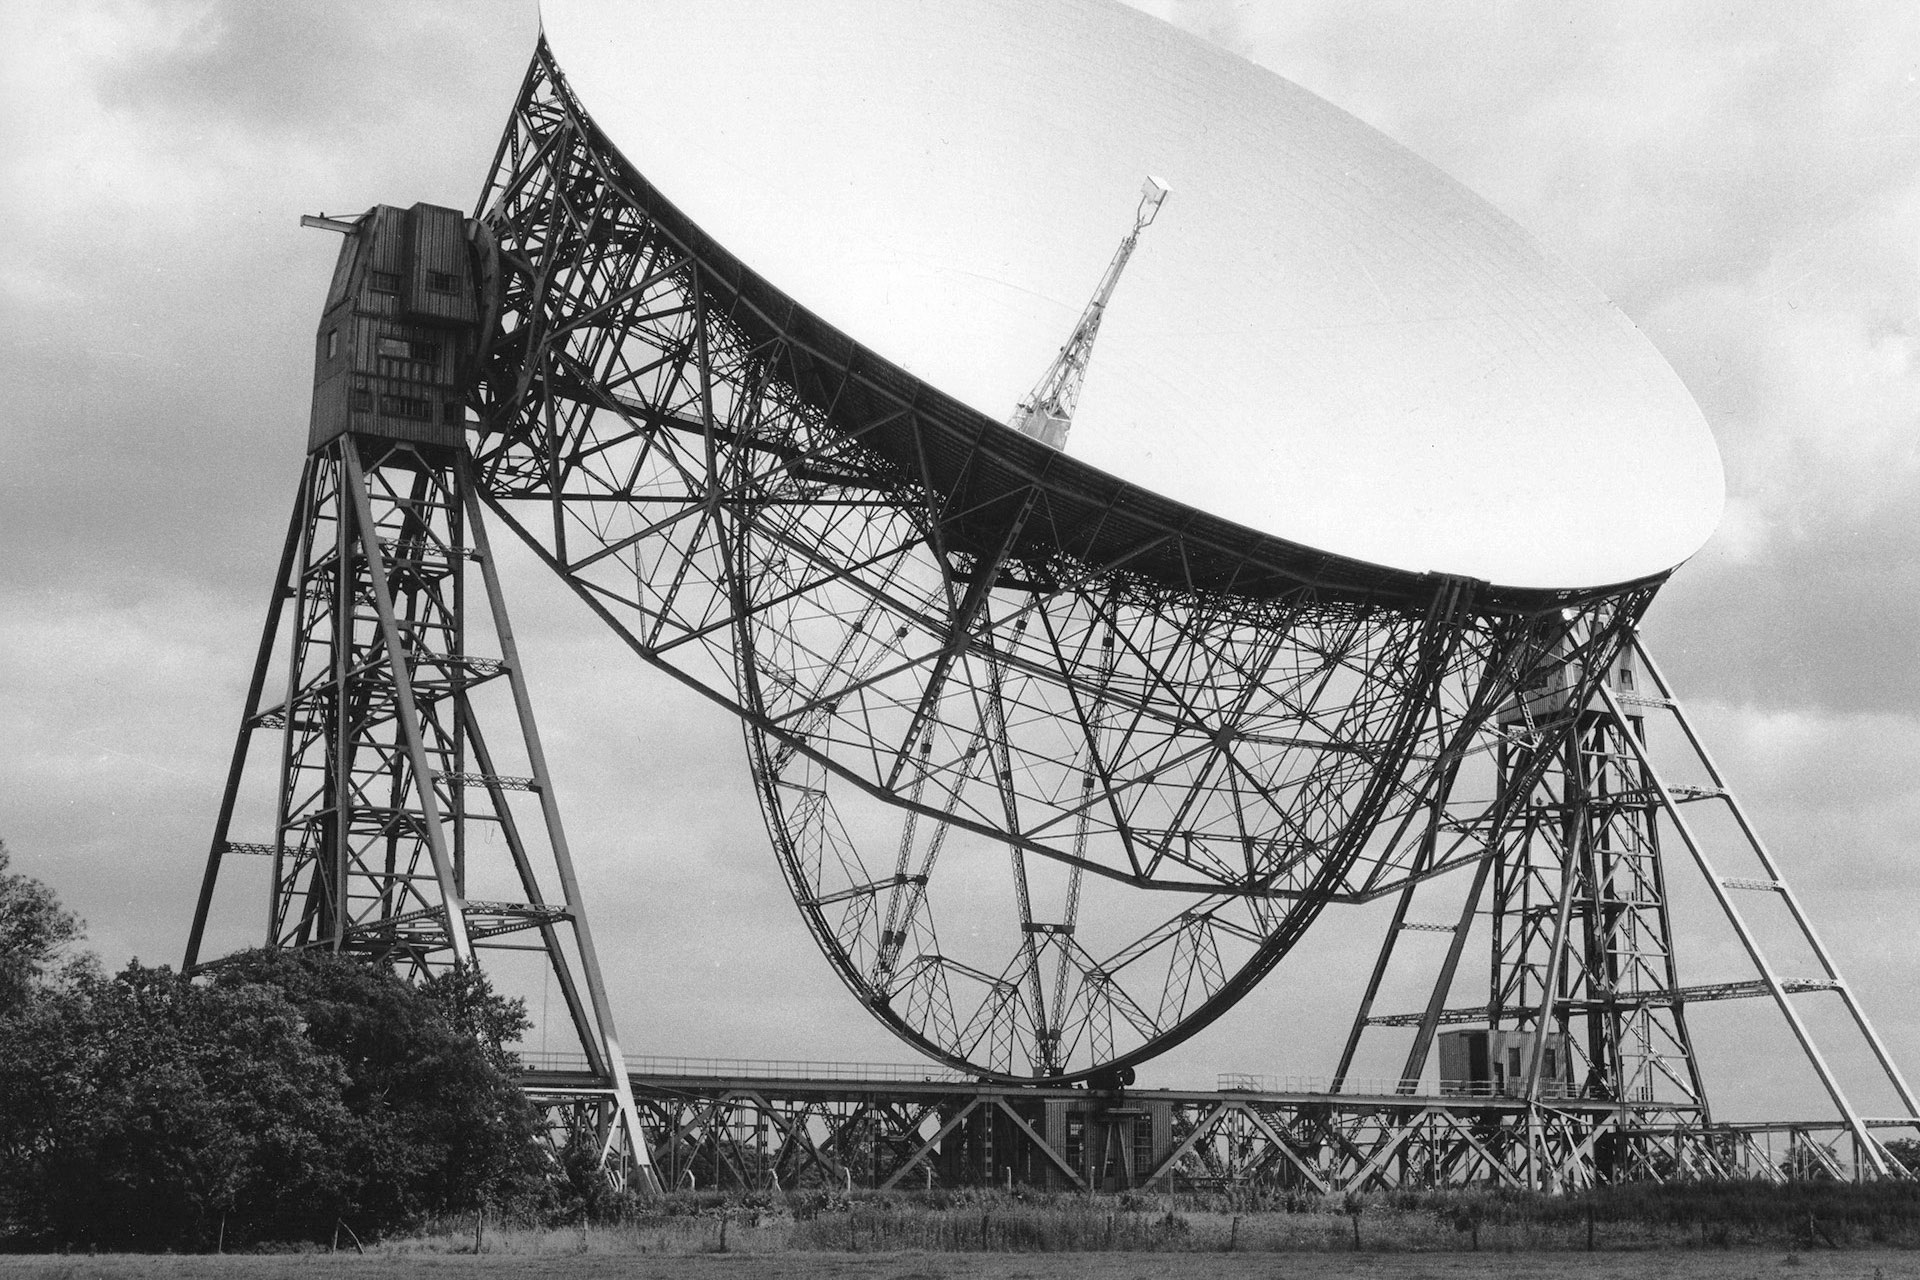 The Early Years of Jodrell Bank